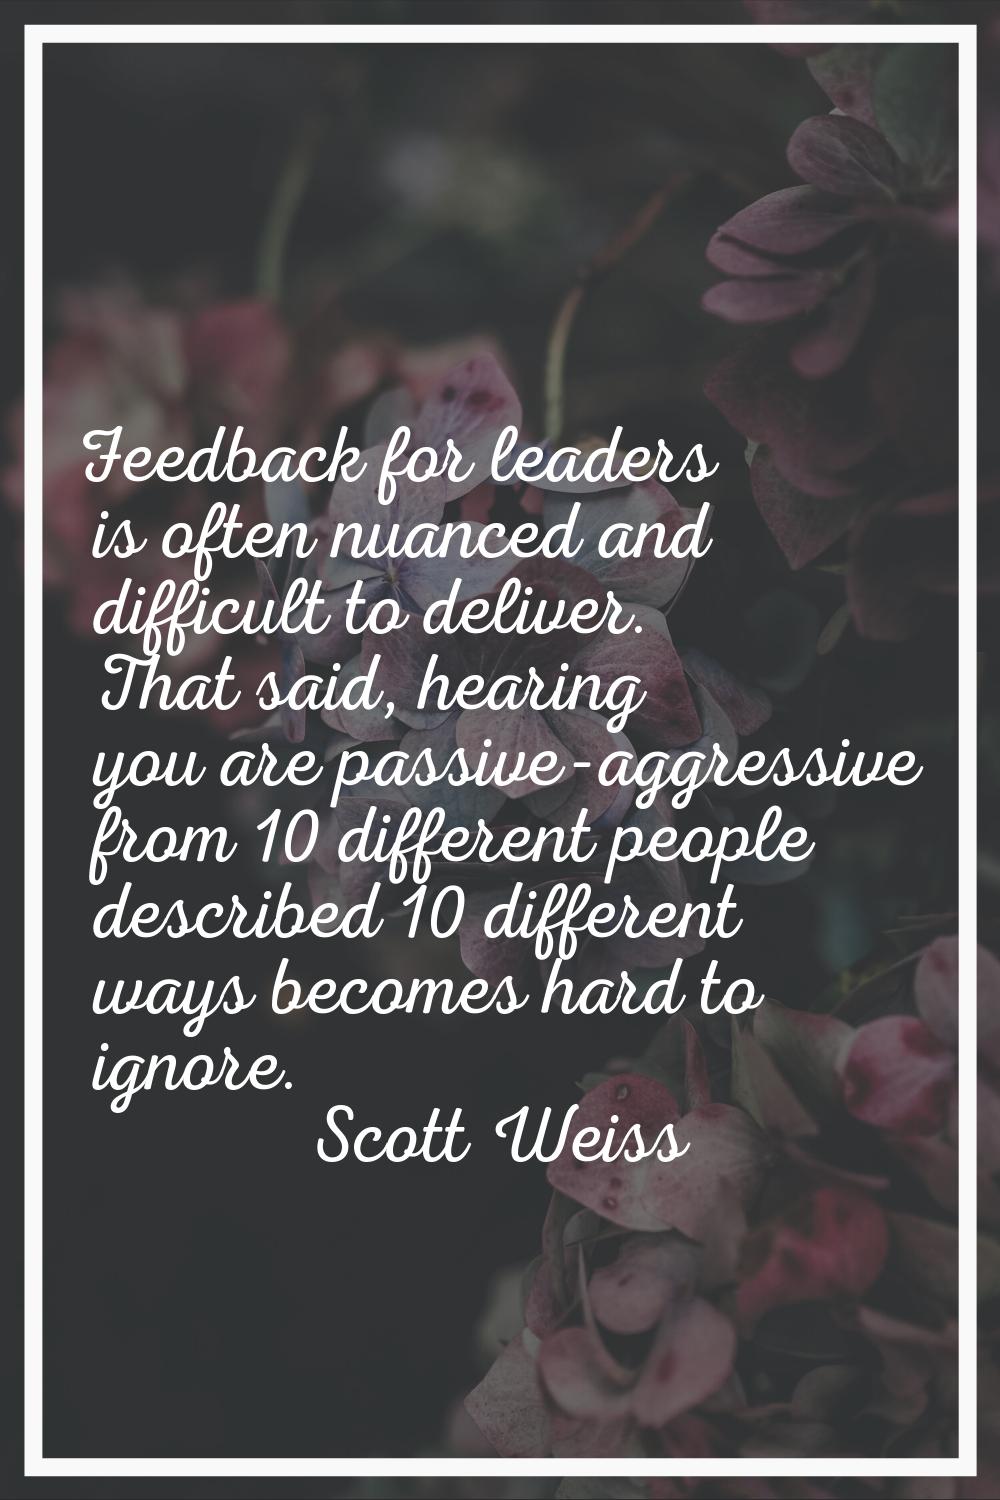 Feedback for leaders is often nuanced and difficult to deliver. That said, hearing you are passive-